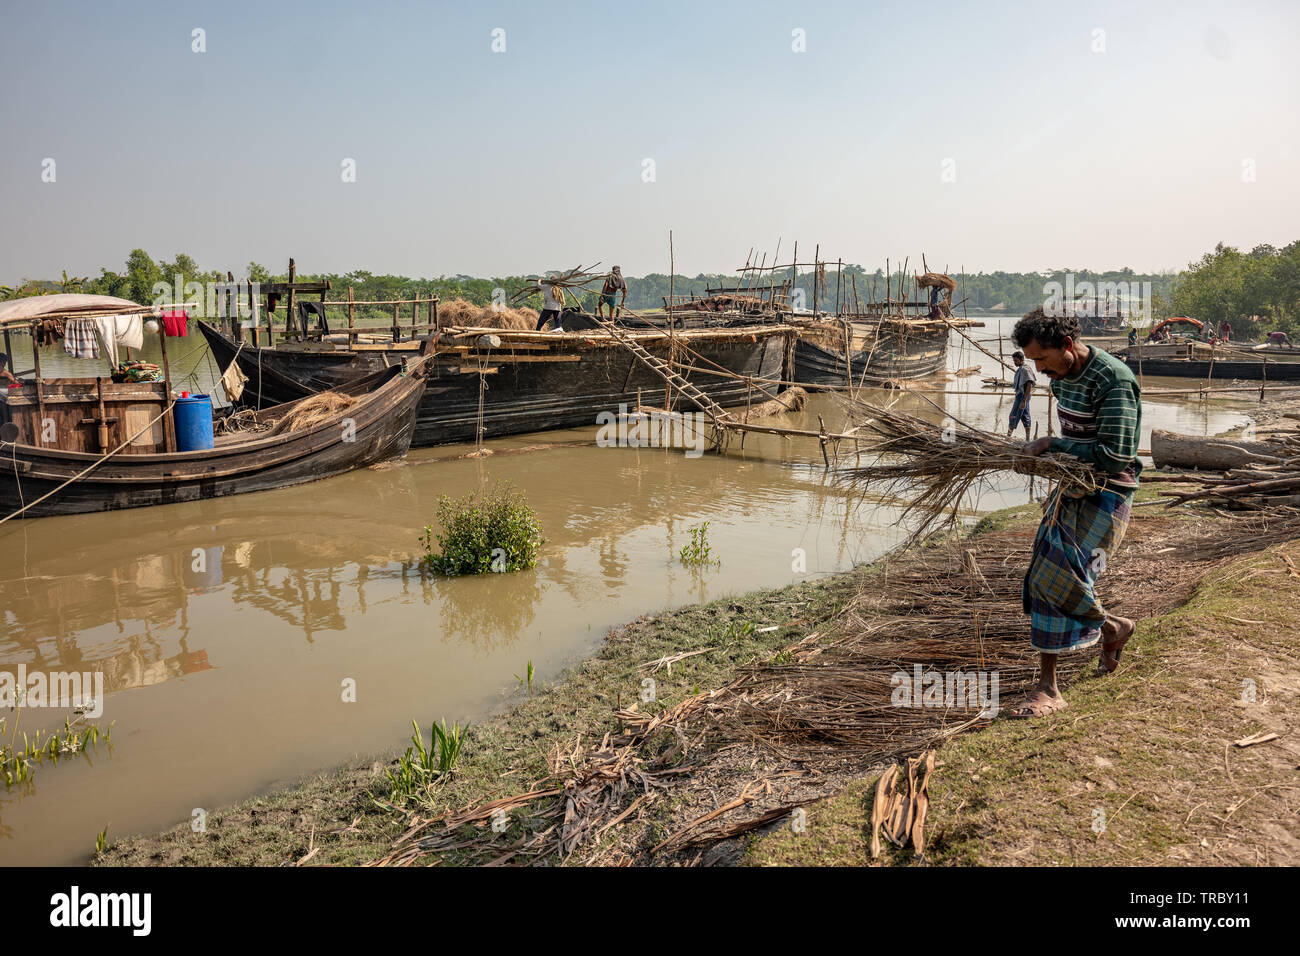 Rice straw being harvested and loaded on boats in Bangladesh Stock Photo